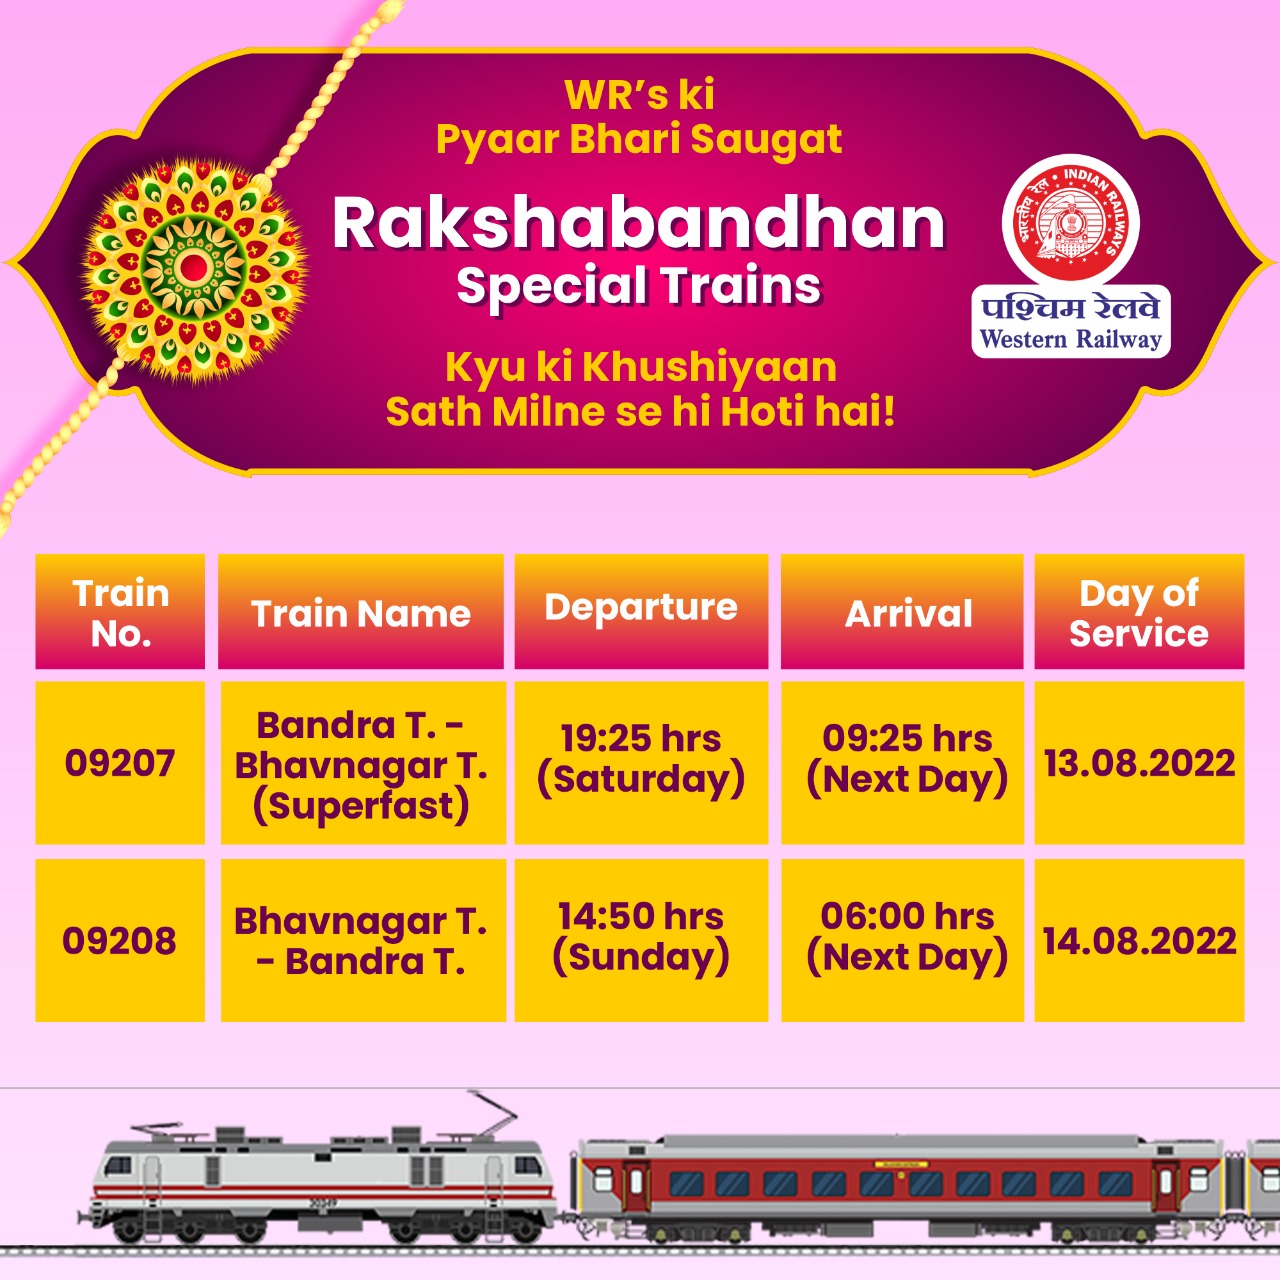 09207 Bandra Terminus-Bhavnagar Terminus Superfast Special will leave Bandra Terminus at 19.25 hrs on August 13 and reach Bhavnagar at 09.25 hrs the next day. On August 14, train number 09208 Bhavnagar Terminus-Bandra Terminus Special will leave Bhavnagar Terminus at 14.50 hrs and reach Bandra Terminus at 06.00 hrs the next day. The train will run on Sunday, August 14, 2022. The train will have AC 2-tier, AC 3-tier, sleeper class and second class general coaches. (Image: Twitter/Western Railway) 09208 Bhavnagar Terminus-Bandra Terminus Special train will leave Bhavnagar Terminus at 14.50 hrs and reach Bandra Terminus at 06.00 hrs the next day. The train will run on Thursday, September 1, 2022. Similarly, train number 09207 Bandra Terminus-Bhavnagar Terminus Special will leave Bandra Terminus at 09.15 hrs and reach Bhavnagar at 23.45 hrs on the same day. The train will have AC 2-tier, AC 3-tier, sleeper class and second class general coaches.